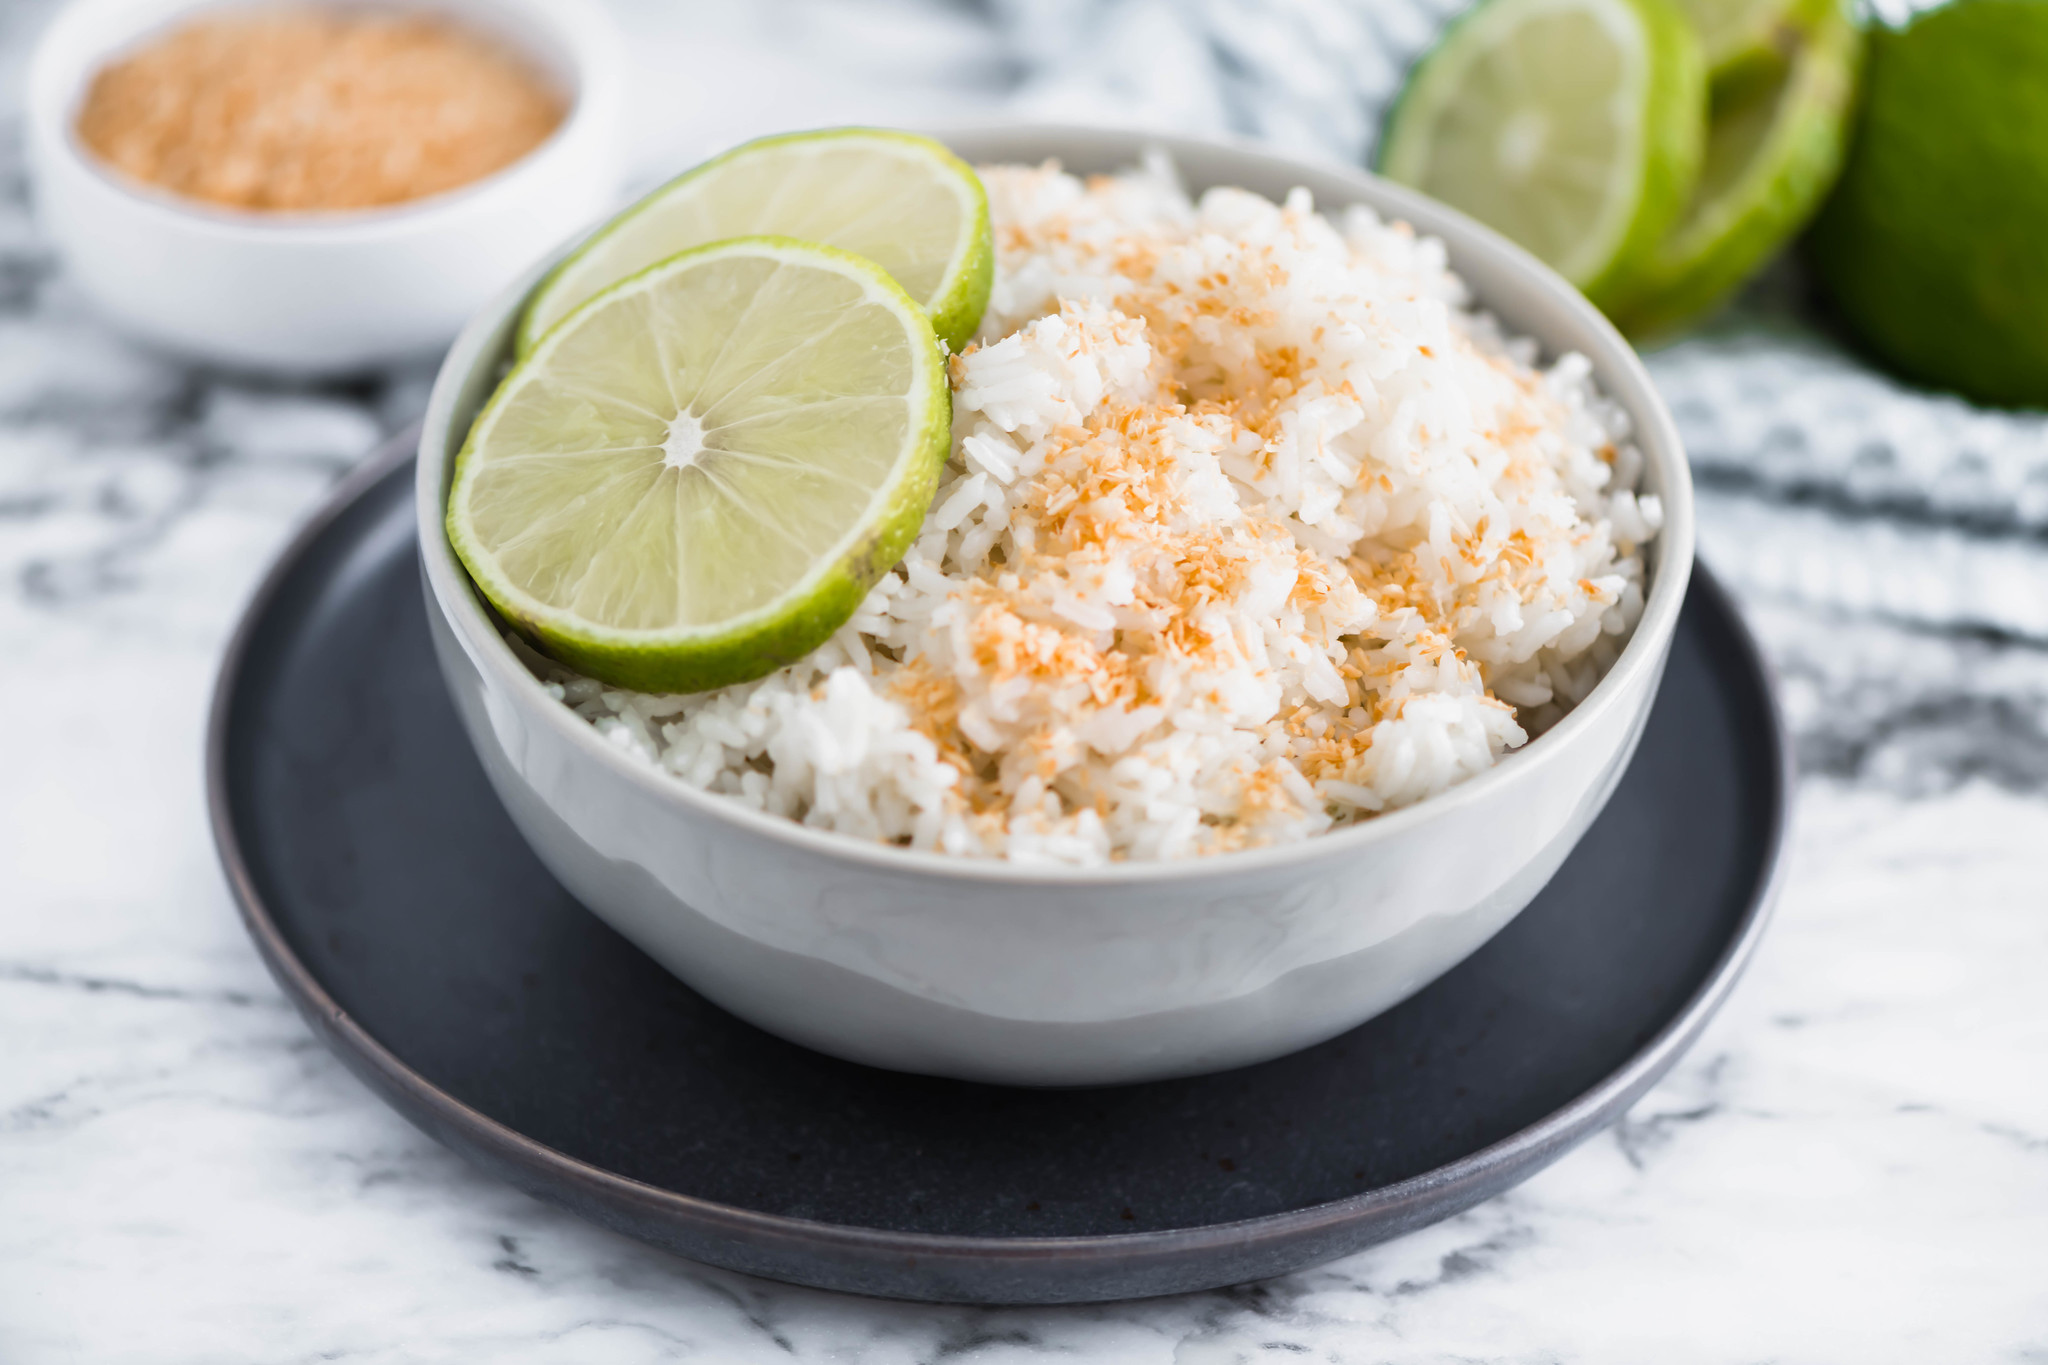 The Instant Pot obsession continues with this Instant Pot Coconut Lime Rice. Ridiculously easy to make and packed full of tropical flavor.